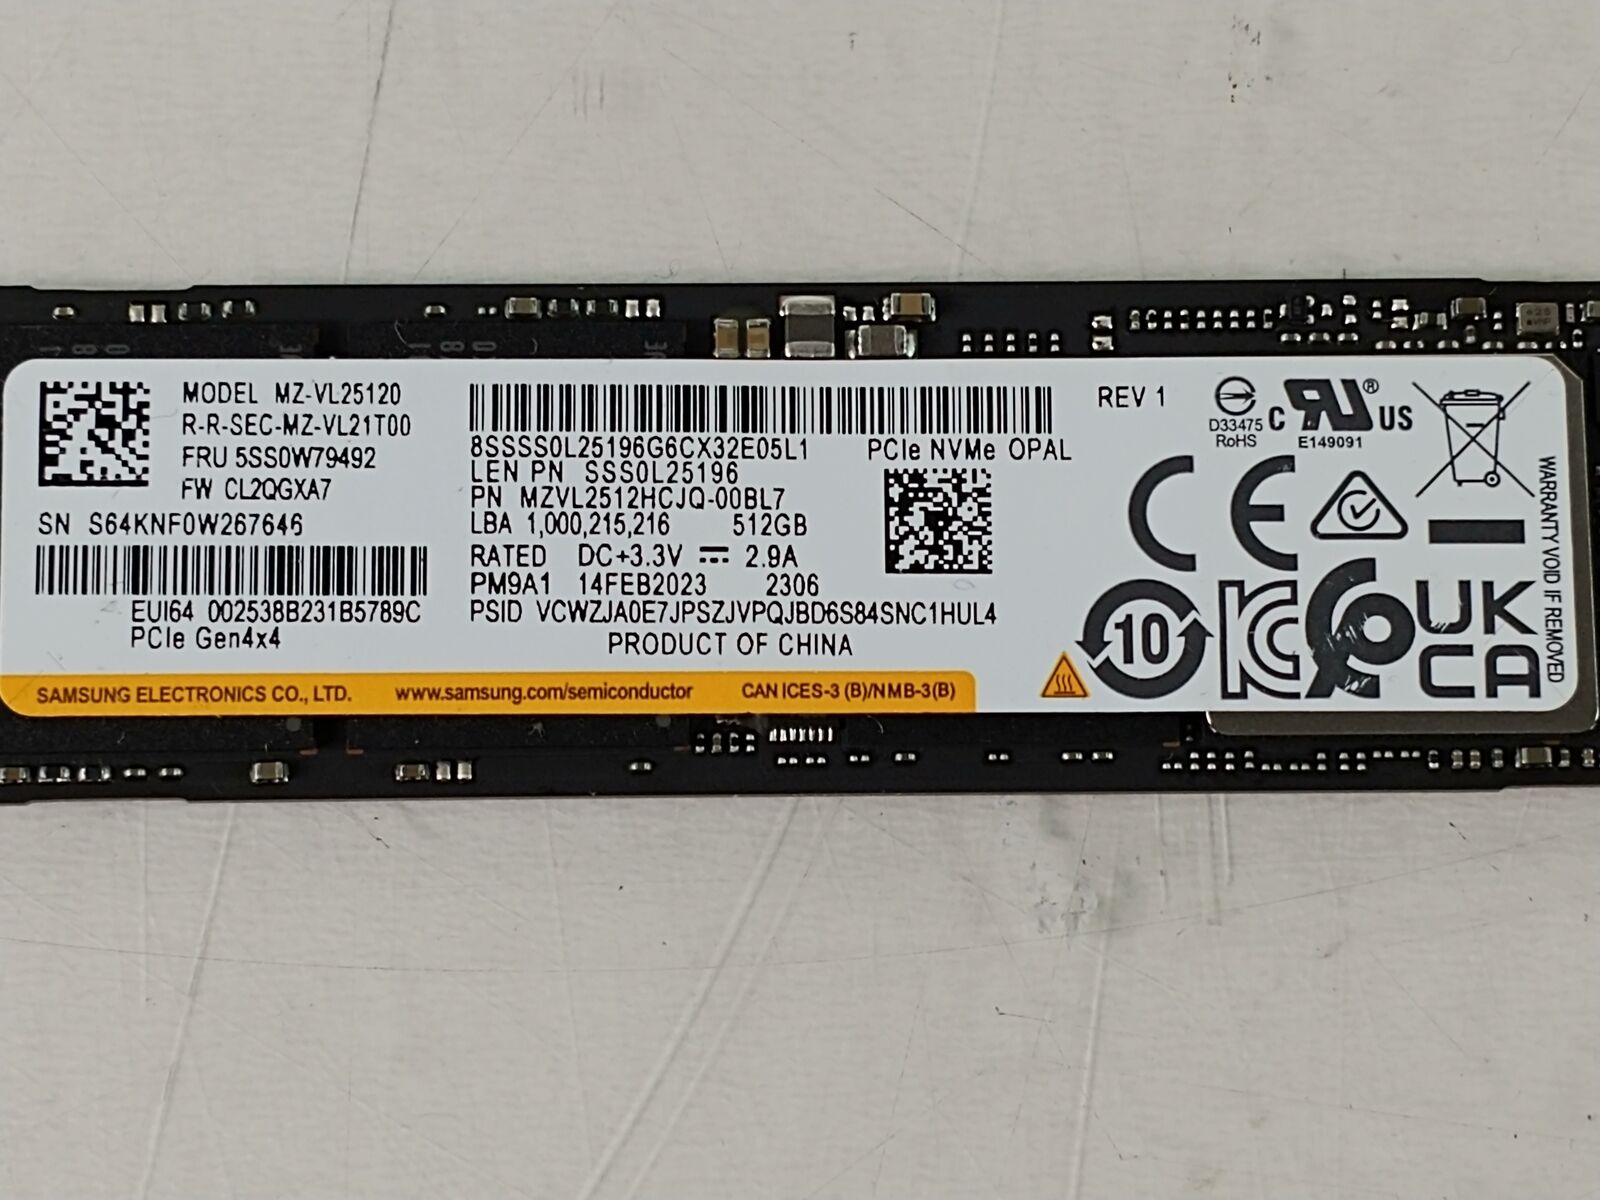 Samsung PM9A1 MZ-VL25120 512 GB NVMe 80mm Solid State Drive